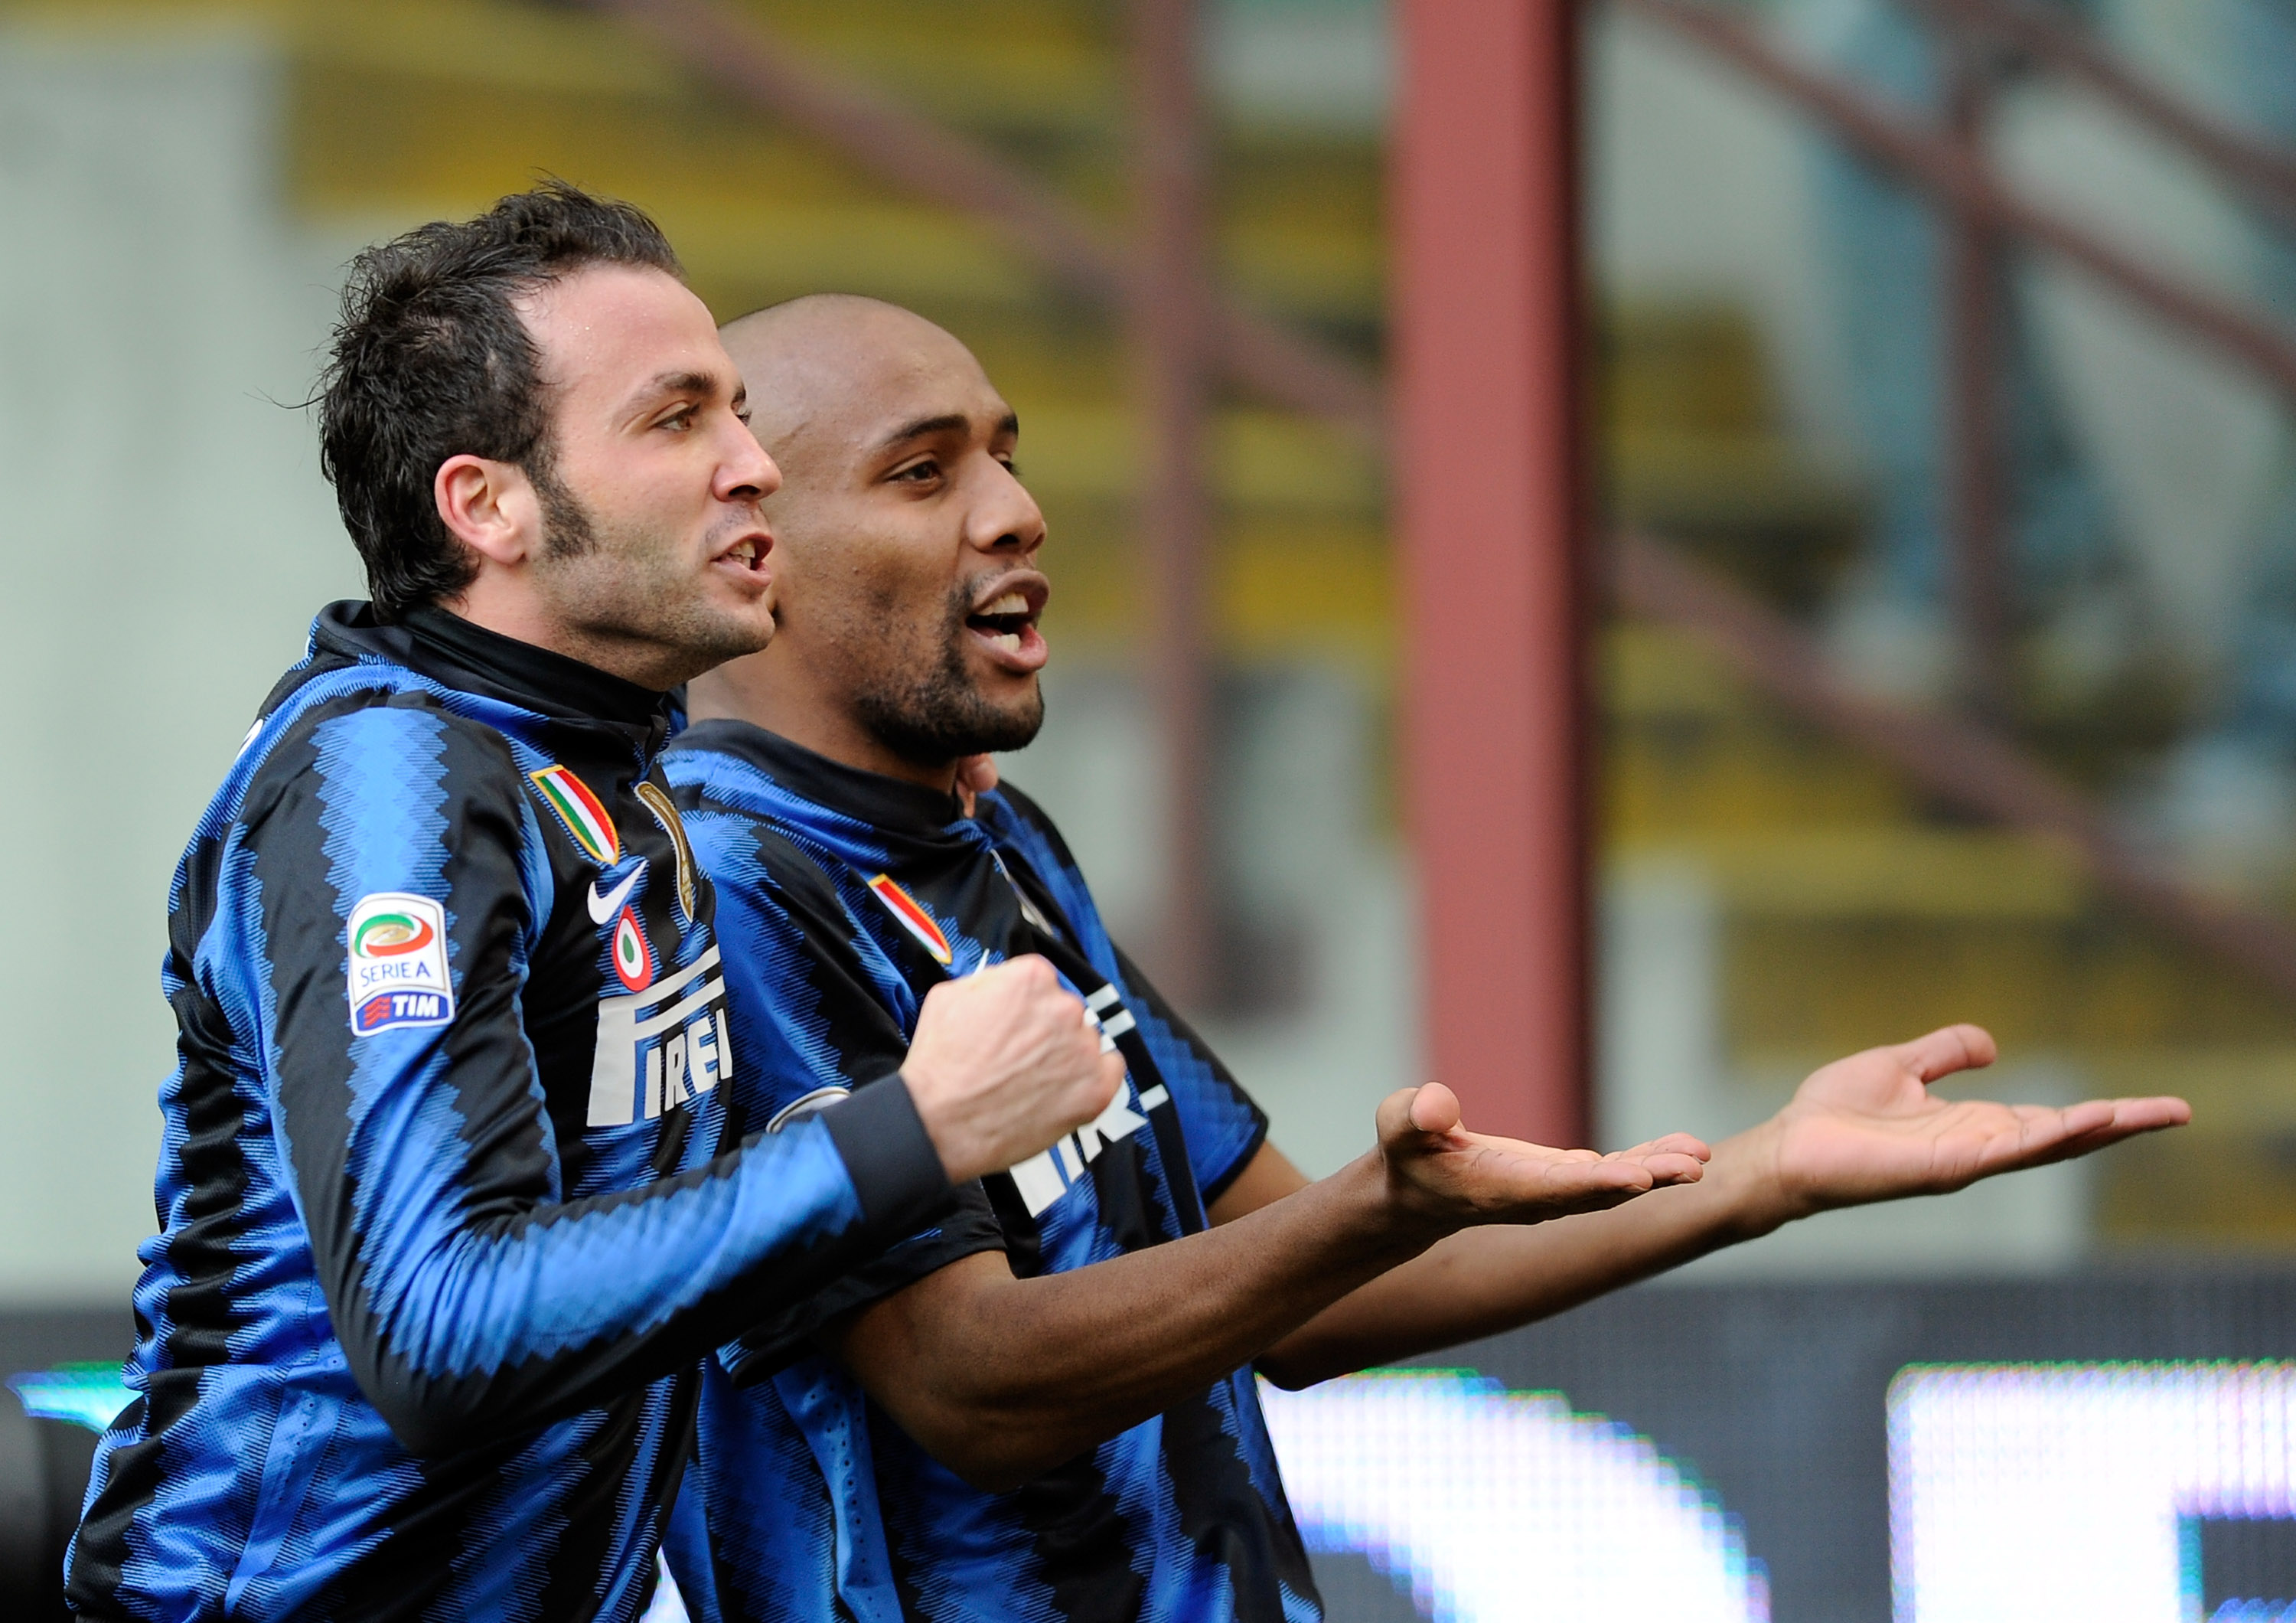 MILAN, ITALY - MARCH 06:  Giampaolo Pazzini of Inter Milan (L) celebrates scoring the opening goal with team--mate Maicon during the Serie A match between FC Internazionale Milano and Genoa CFC at Stadio Giuseppe Meazza on March 06, 2011 in Milan, Italy.